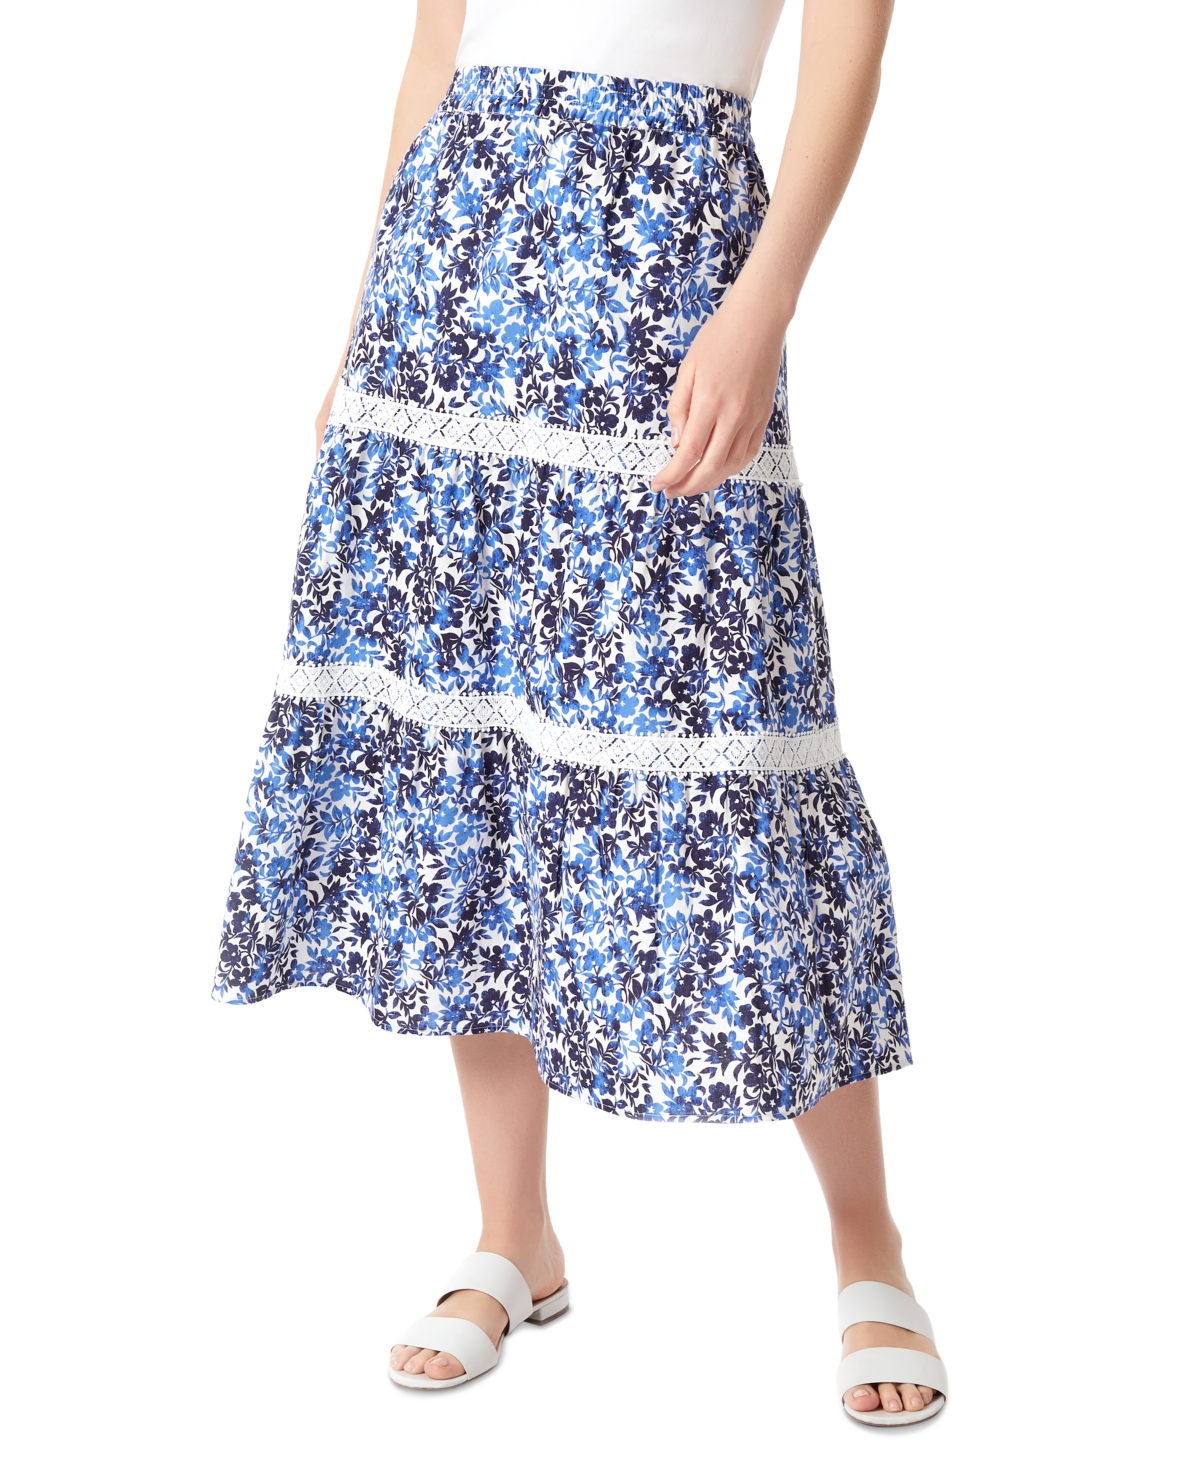 Women's Floral-Print Lace-Trimmed Tiered Pull-On Midi Skirt - NYC White/Blue Horizon